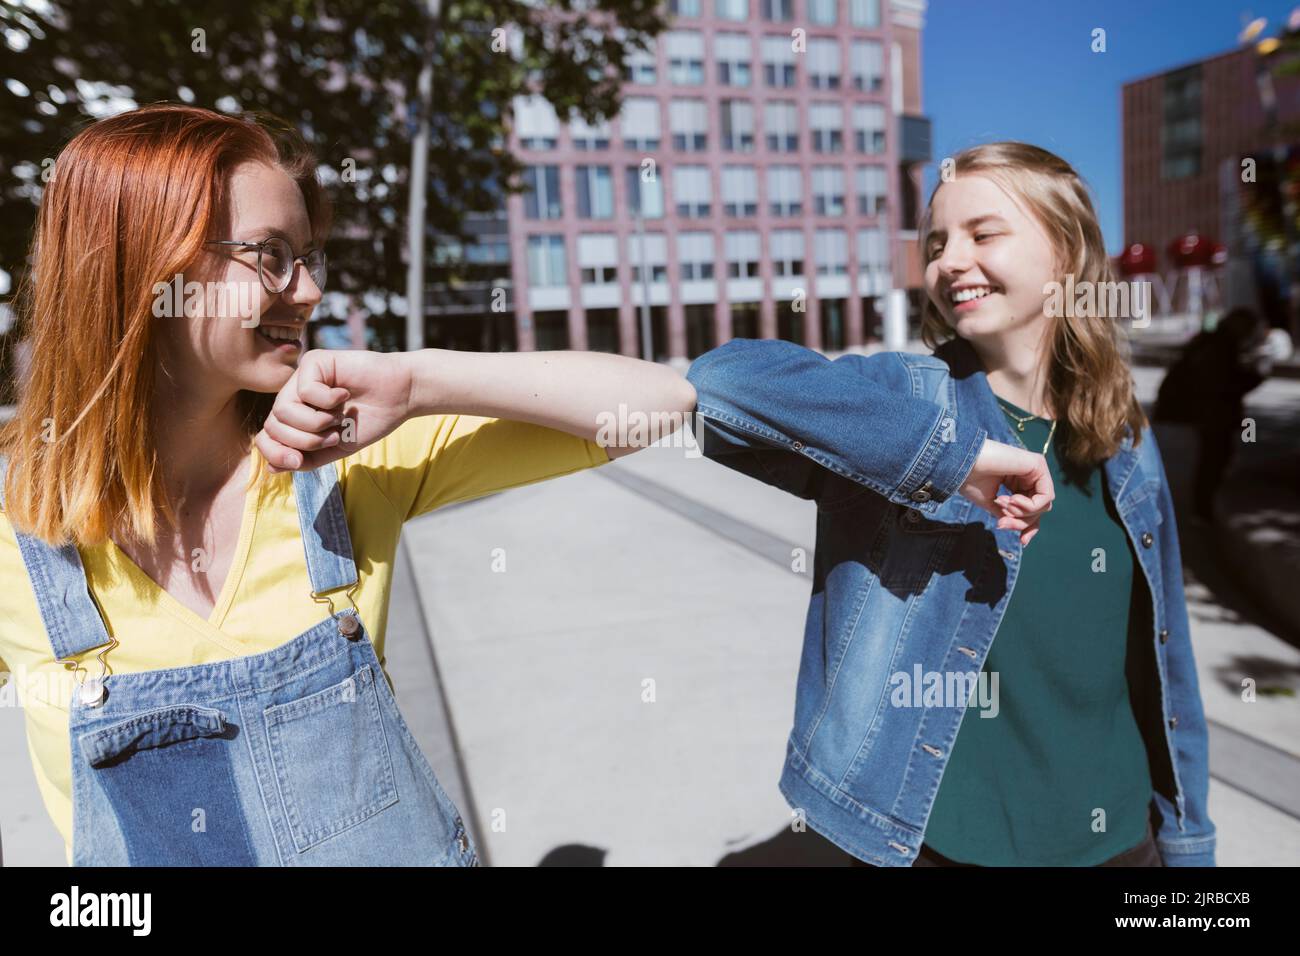 Smiling young friends doing elbow bump Stock Photo